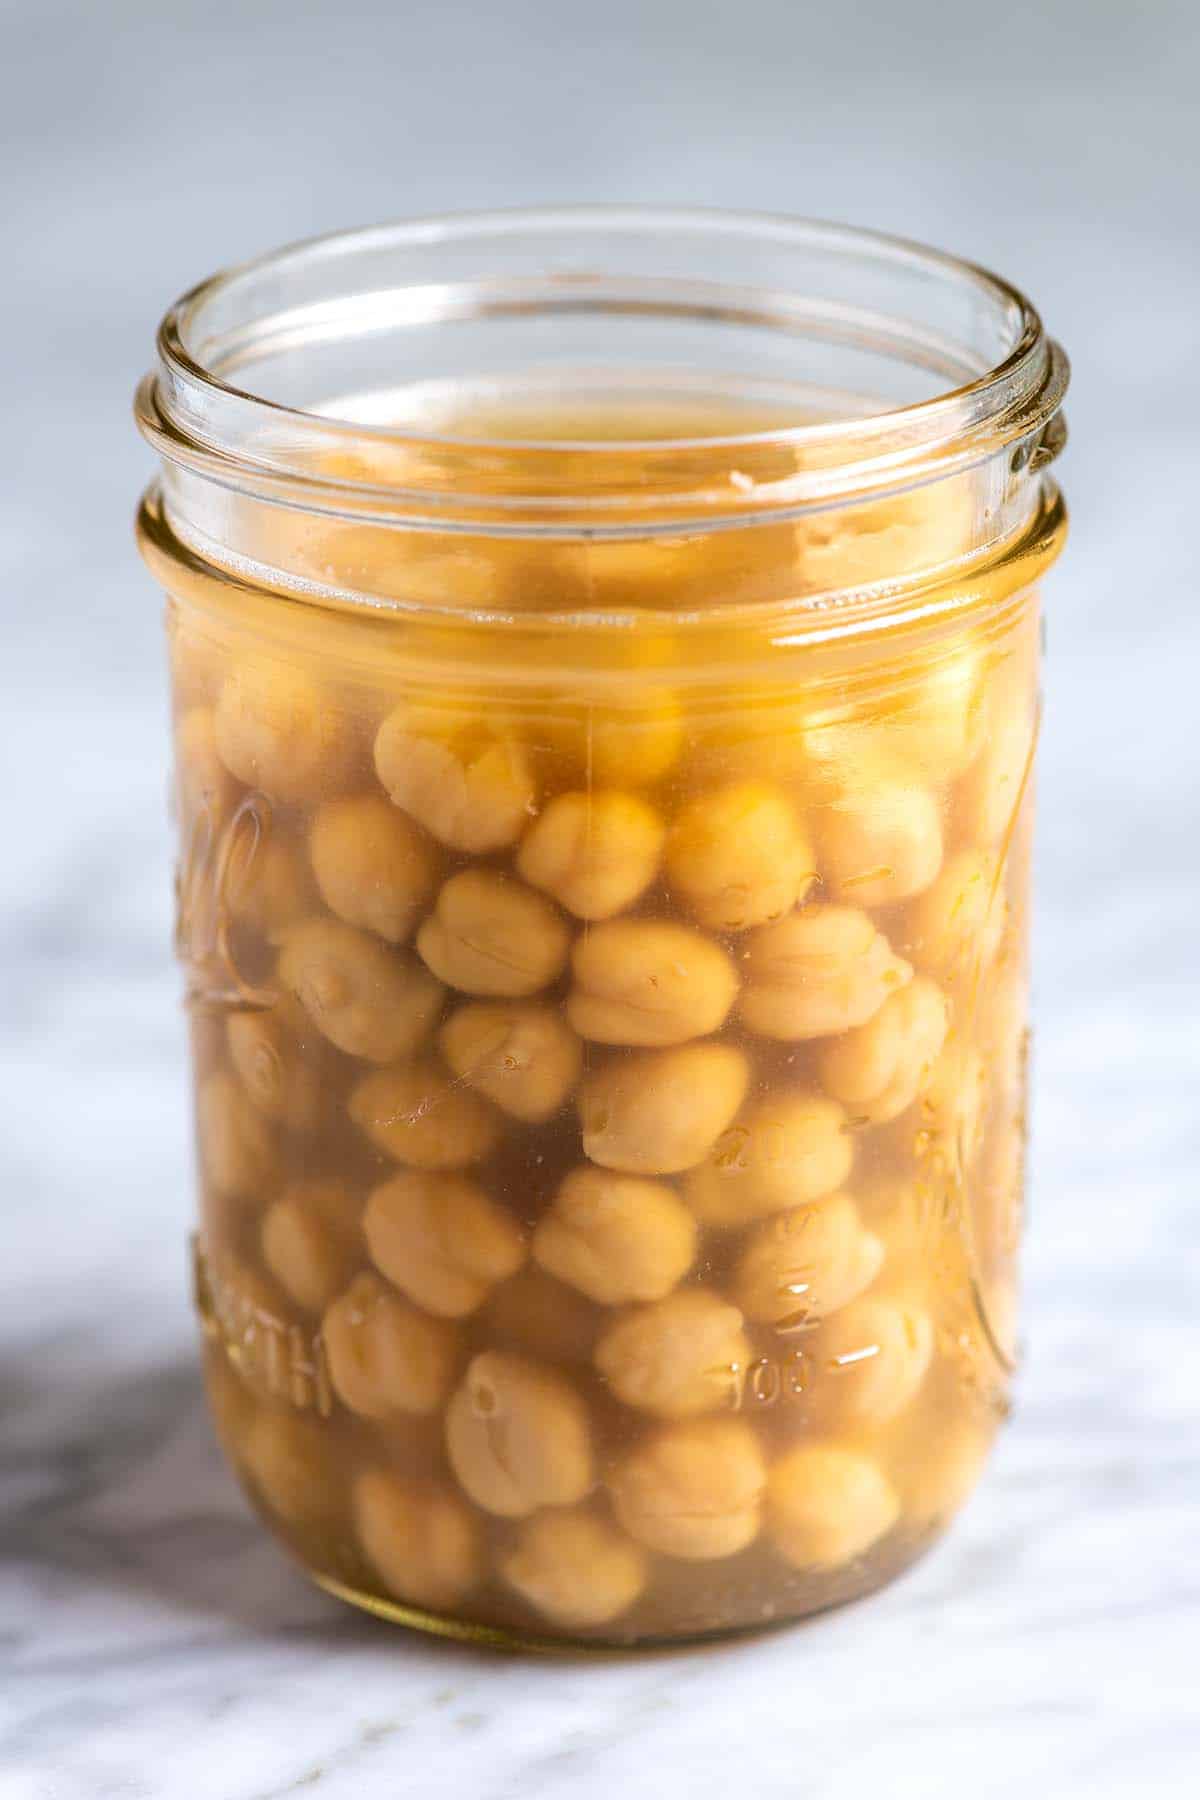 Jar of cooked chickpeas and aquafaba